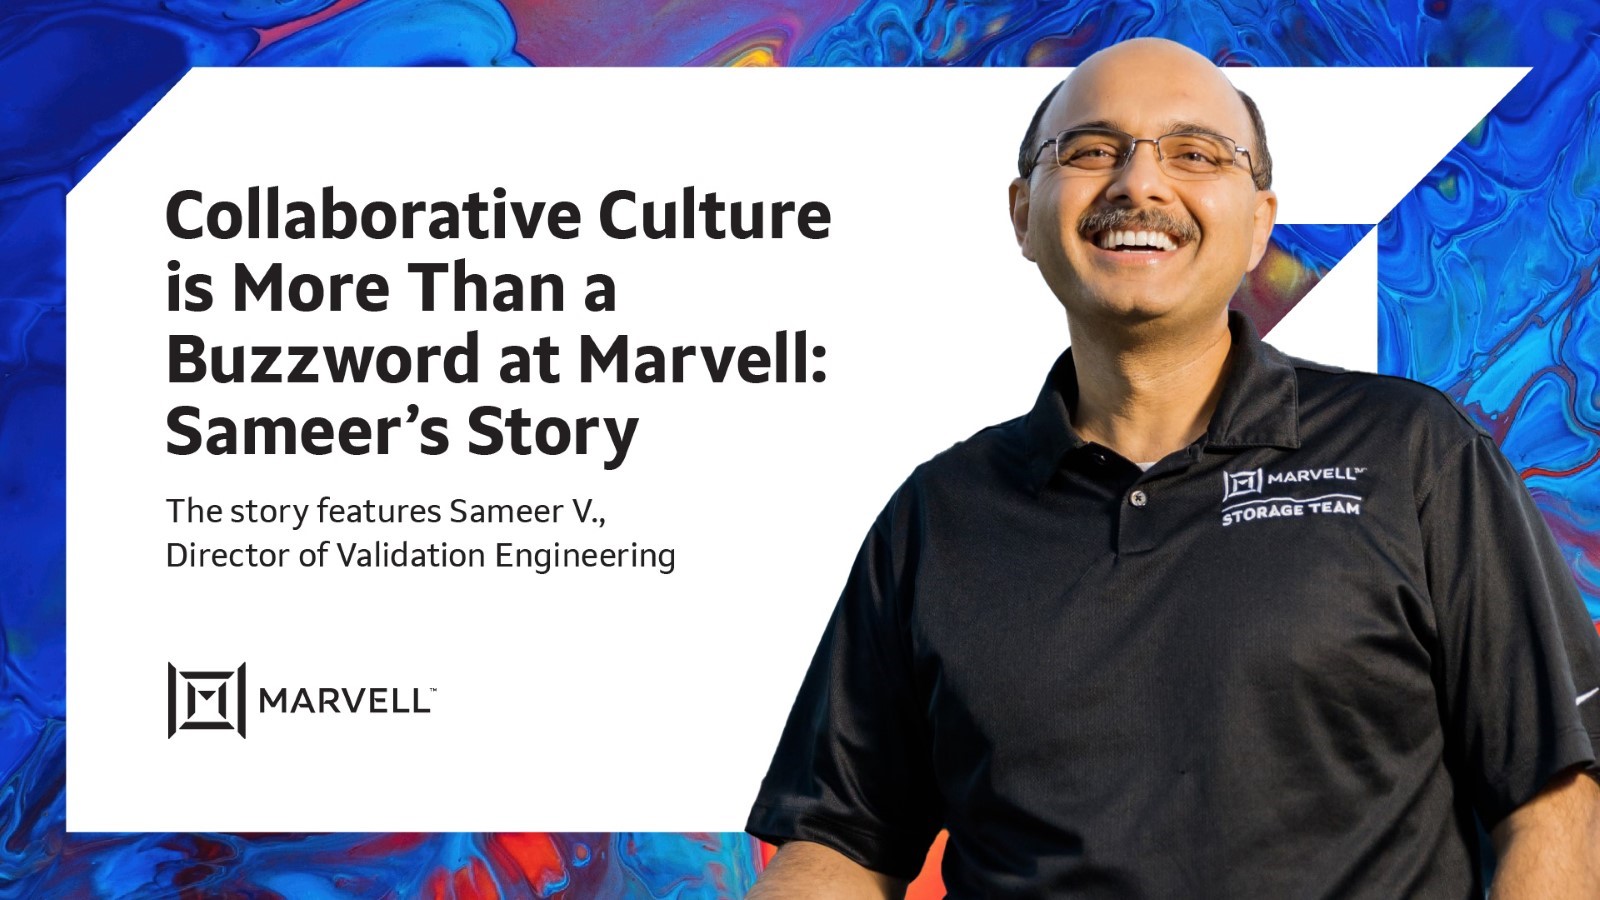  Collaborative Culture is More Than a Buzzword at Marvell: Sameer Vaidya’s Story